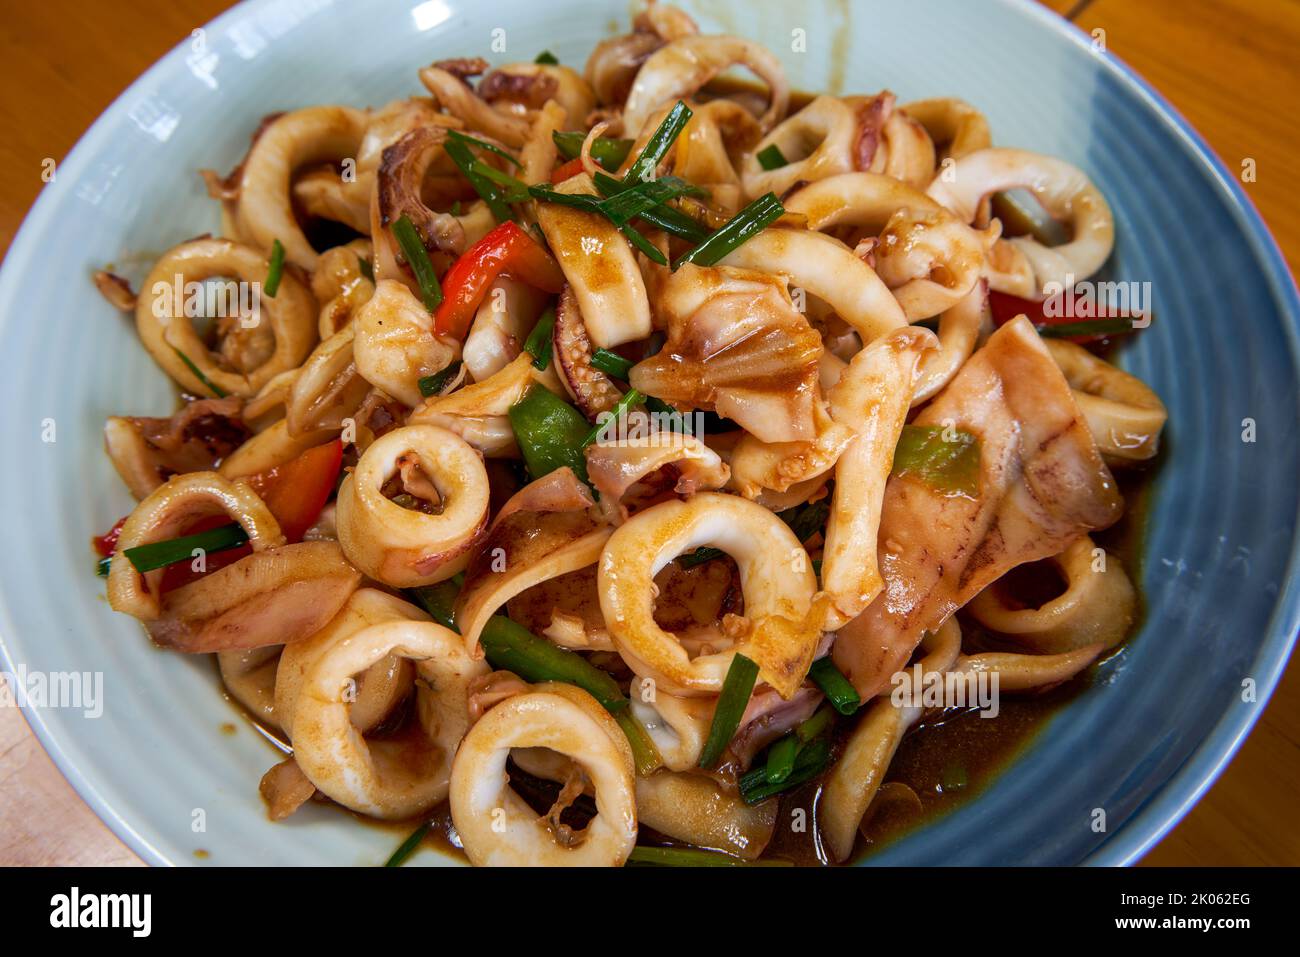 A plate of delicious and fragrant Chinese food with fried squid rings Stock Photo